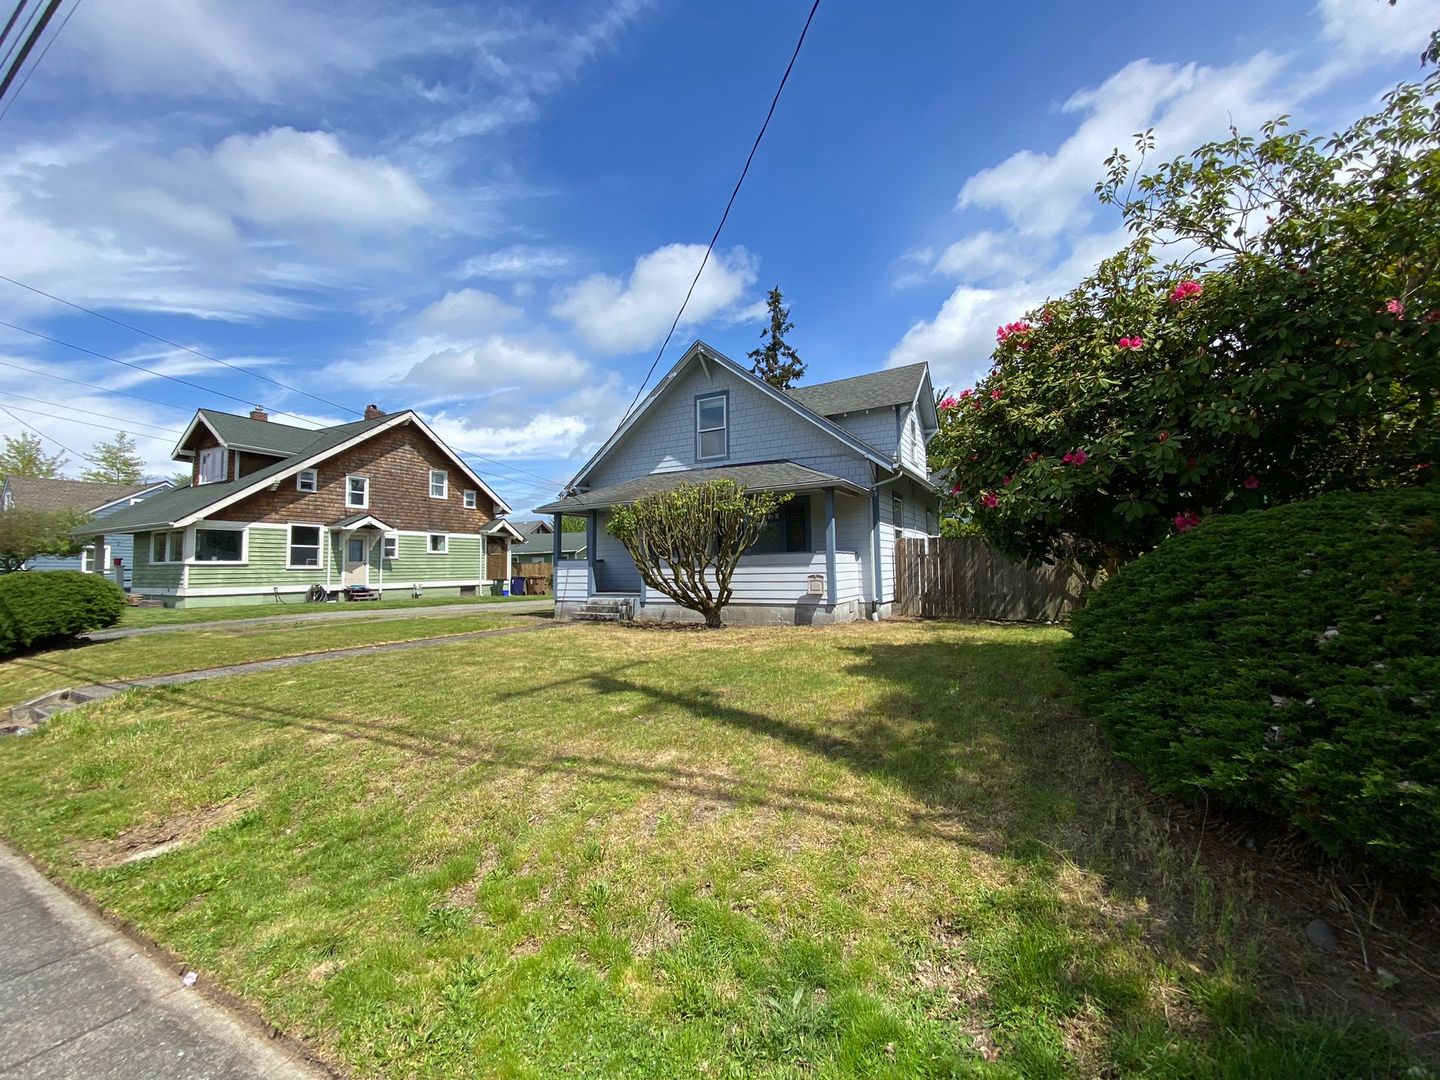 Beautiful house in Tacoma with new granite countertops and hardwood flooring!